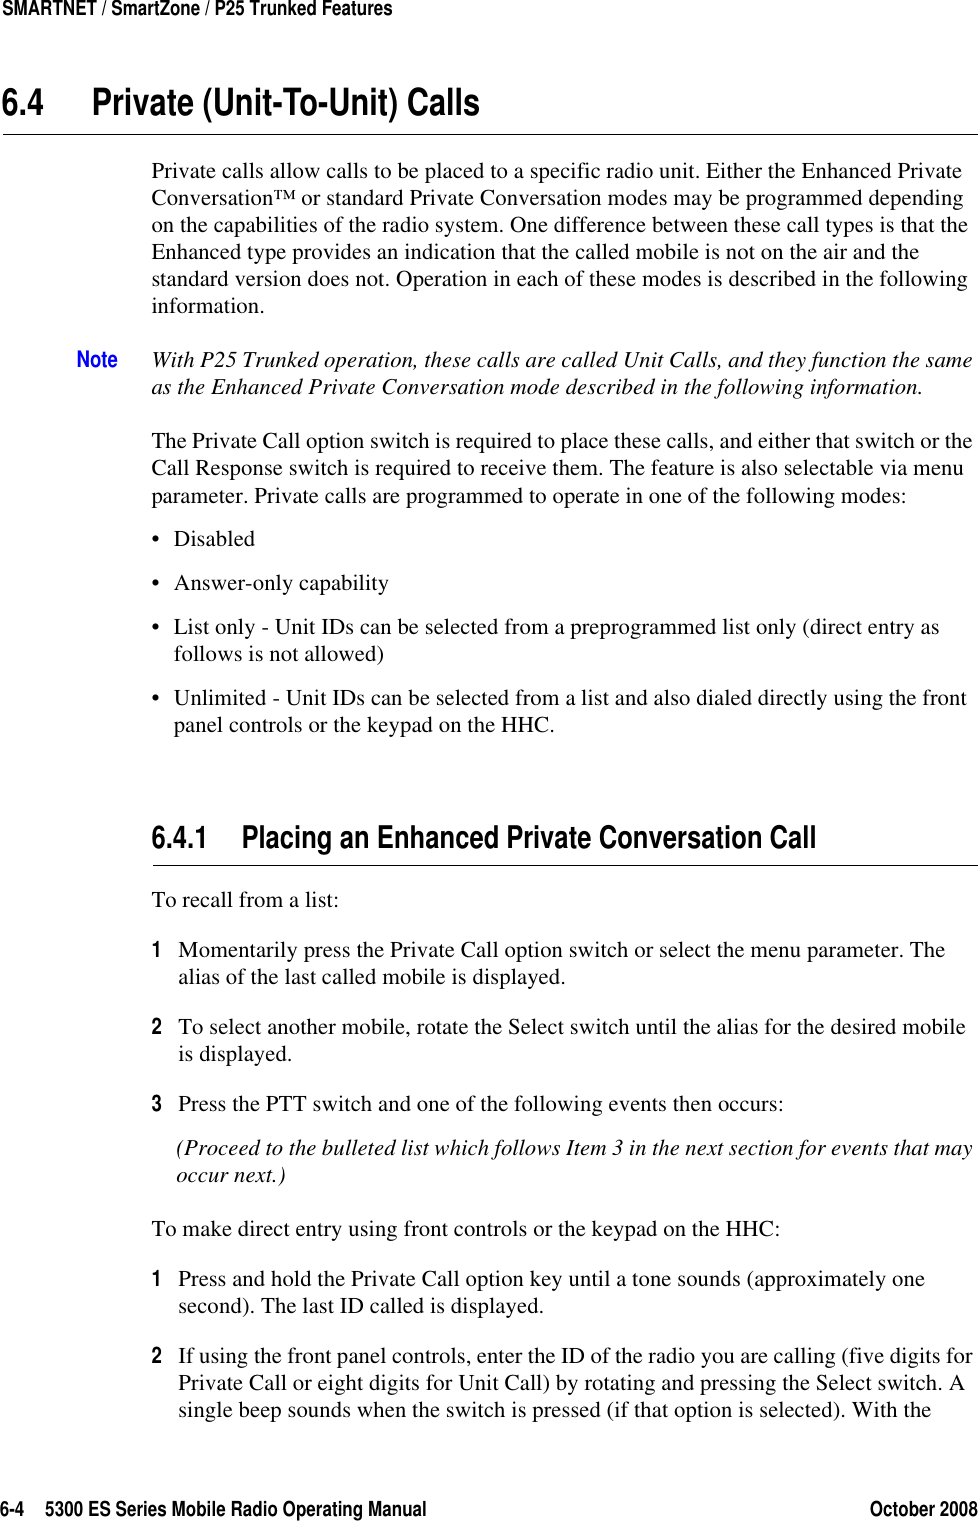 6-4 5300 ES Series Mobile Radio Operating Manual October 2008SMARTNET / SmartZone / P25 Trunked Features6.4 Private (Unit-To-Unit) CallsPrivate calls allow calls to be placed to a specific radio unit. Either the Enhanced Private Conversation™ or standard Private Conversation modes may be programmed depending on the capabilities of the radio system. One difference between these call types is that the Enhanced type provides an indication that the called mobile is not on the air and the standard version does not. Operation in each of these modes is described in the following information.Note With P25 Trunked operation, these calls are called Unit Calls, and they function the same as the Enhanced Private Conversation mode described in the following information.The Private Call option switch is required to place these calls, and either that switch or the Call Response switch is required to receive them. The feature is also selectable via menu parameter. Private calls are programmed to operate in one of the following modes:•Disabled• Answer-only capability• List only - Unit IDs can be selected from a preprogrammed list only (direct entry as follows is not allowed)• Unlimited - Unit IDs can be selected from a list and also dialed directly using the front panel controls or the keypad on the HHC.6.4.1 Placing an Enhanced Private Conversation Call To recall from a list:1Momentarily press the Private Call option switch or select the menu parameter. The alias of the last called mobile is displayed.2To select another mobile, rotate the Select switch until the alias for the desired mobile is displayed. 3Press the PTT switch and one of the following events then occurs:(Proceed to the bulleted list which follows Item 3 in the next section for events that may occur next.) To make direct entry using front controls or the keypad on the HHC:1Press and hold the Private Call option key until a tone sounds (approximately one second). The last ID called is displayed.2If using the front panel controls, enter the ID of the radio you are calling (five digits for Private Call or eight digits for Unit Call) by rotating and pressing the Select switch. A single beep sounds when the switch is pressed (if that option is selected). With the 